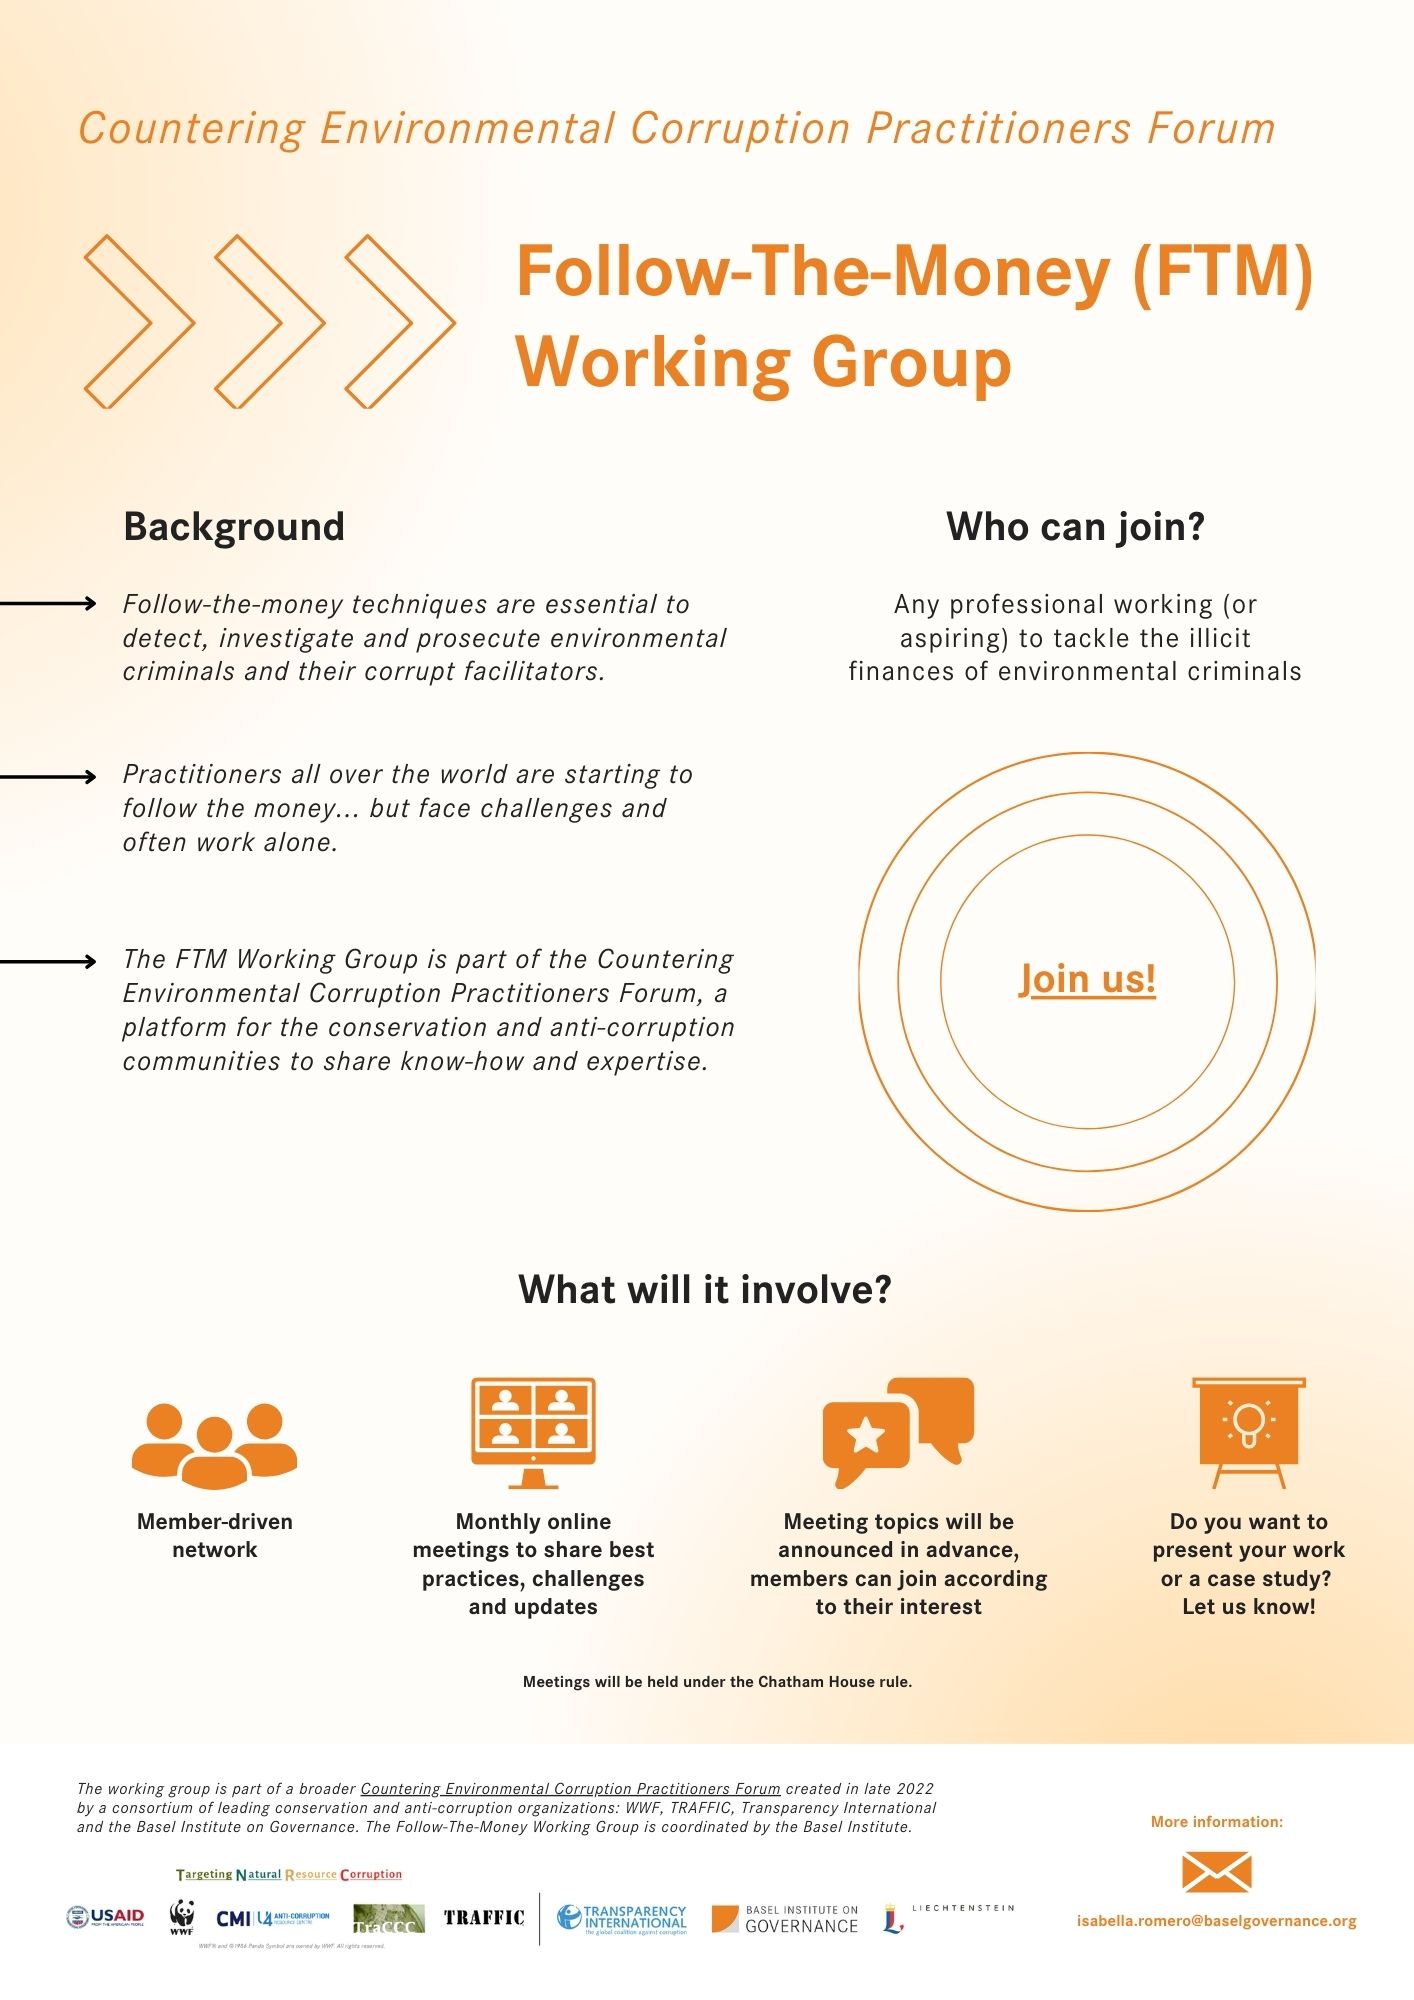 Follow-The-Money Working Group flyer